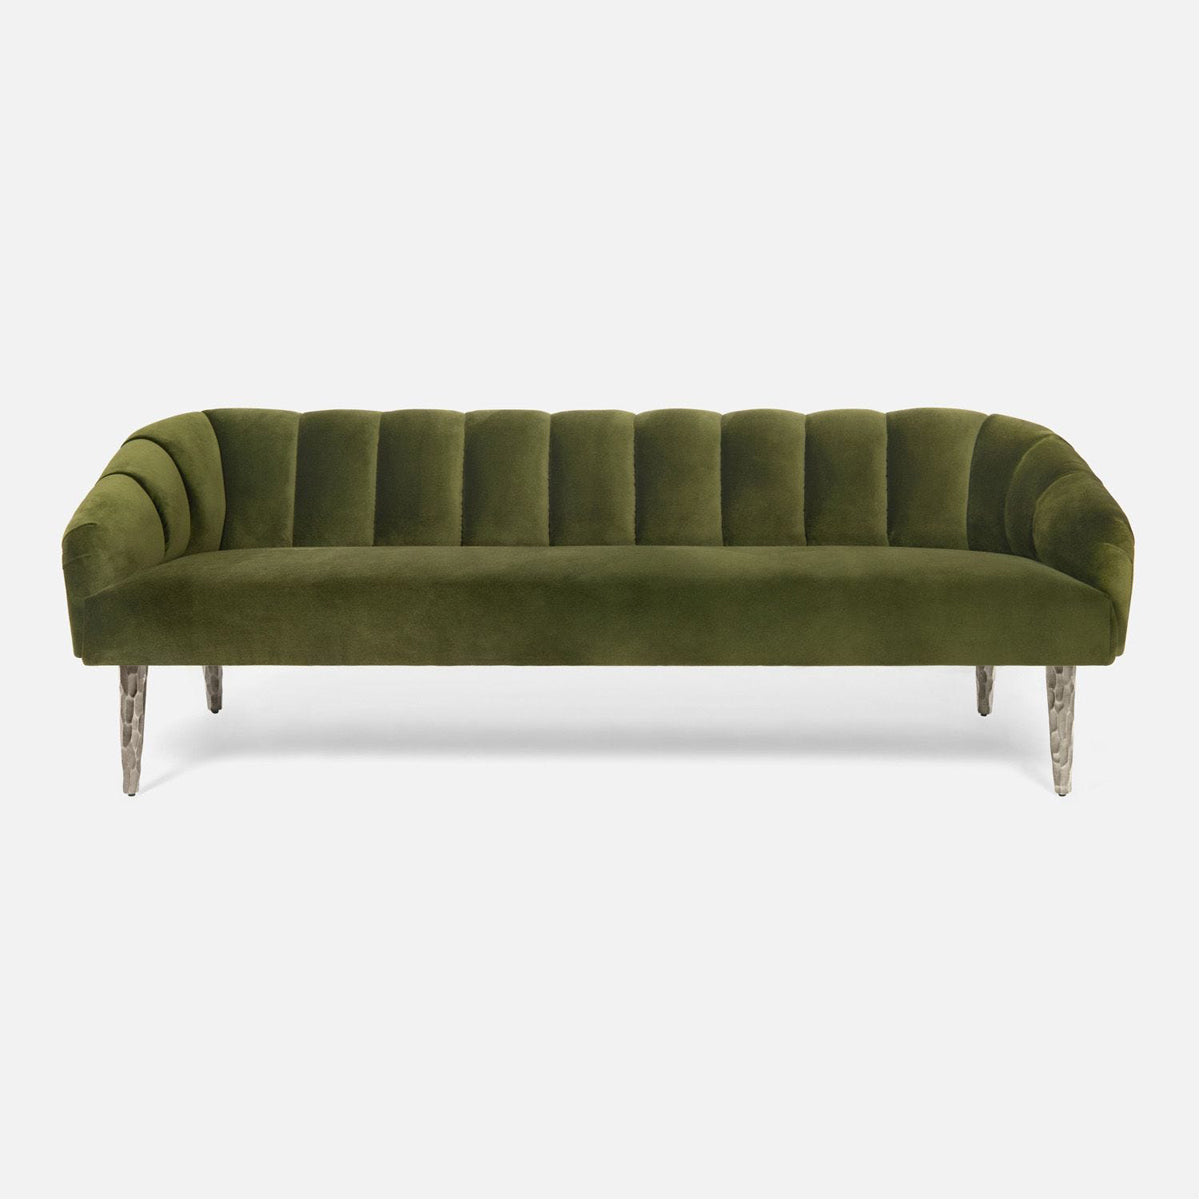 Made Goods Rooney Upholstered Shell Sofa in Nile Fabric